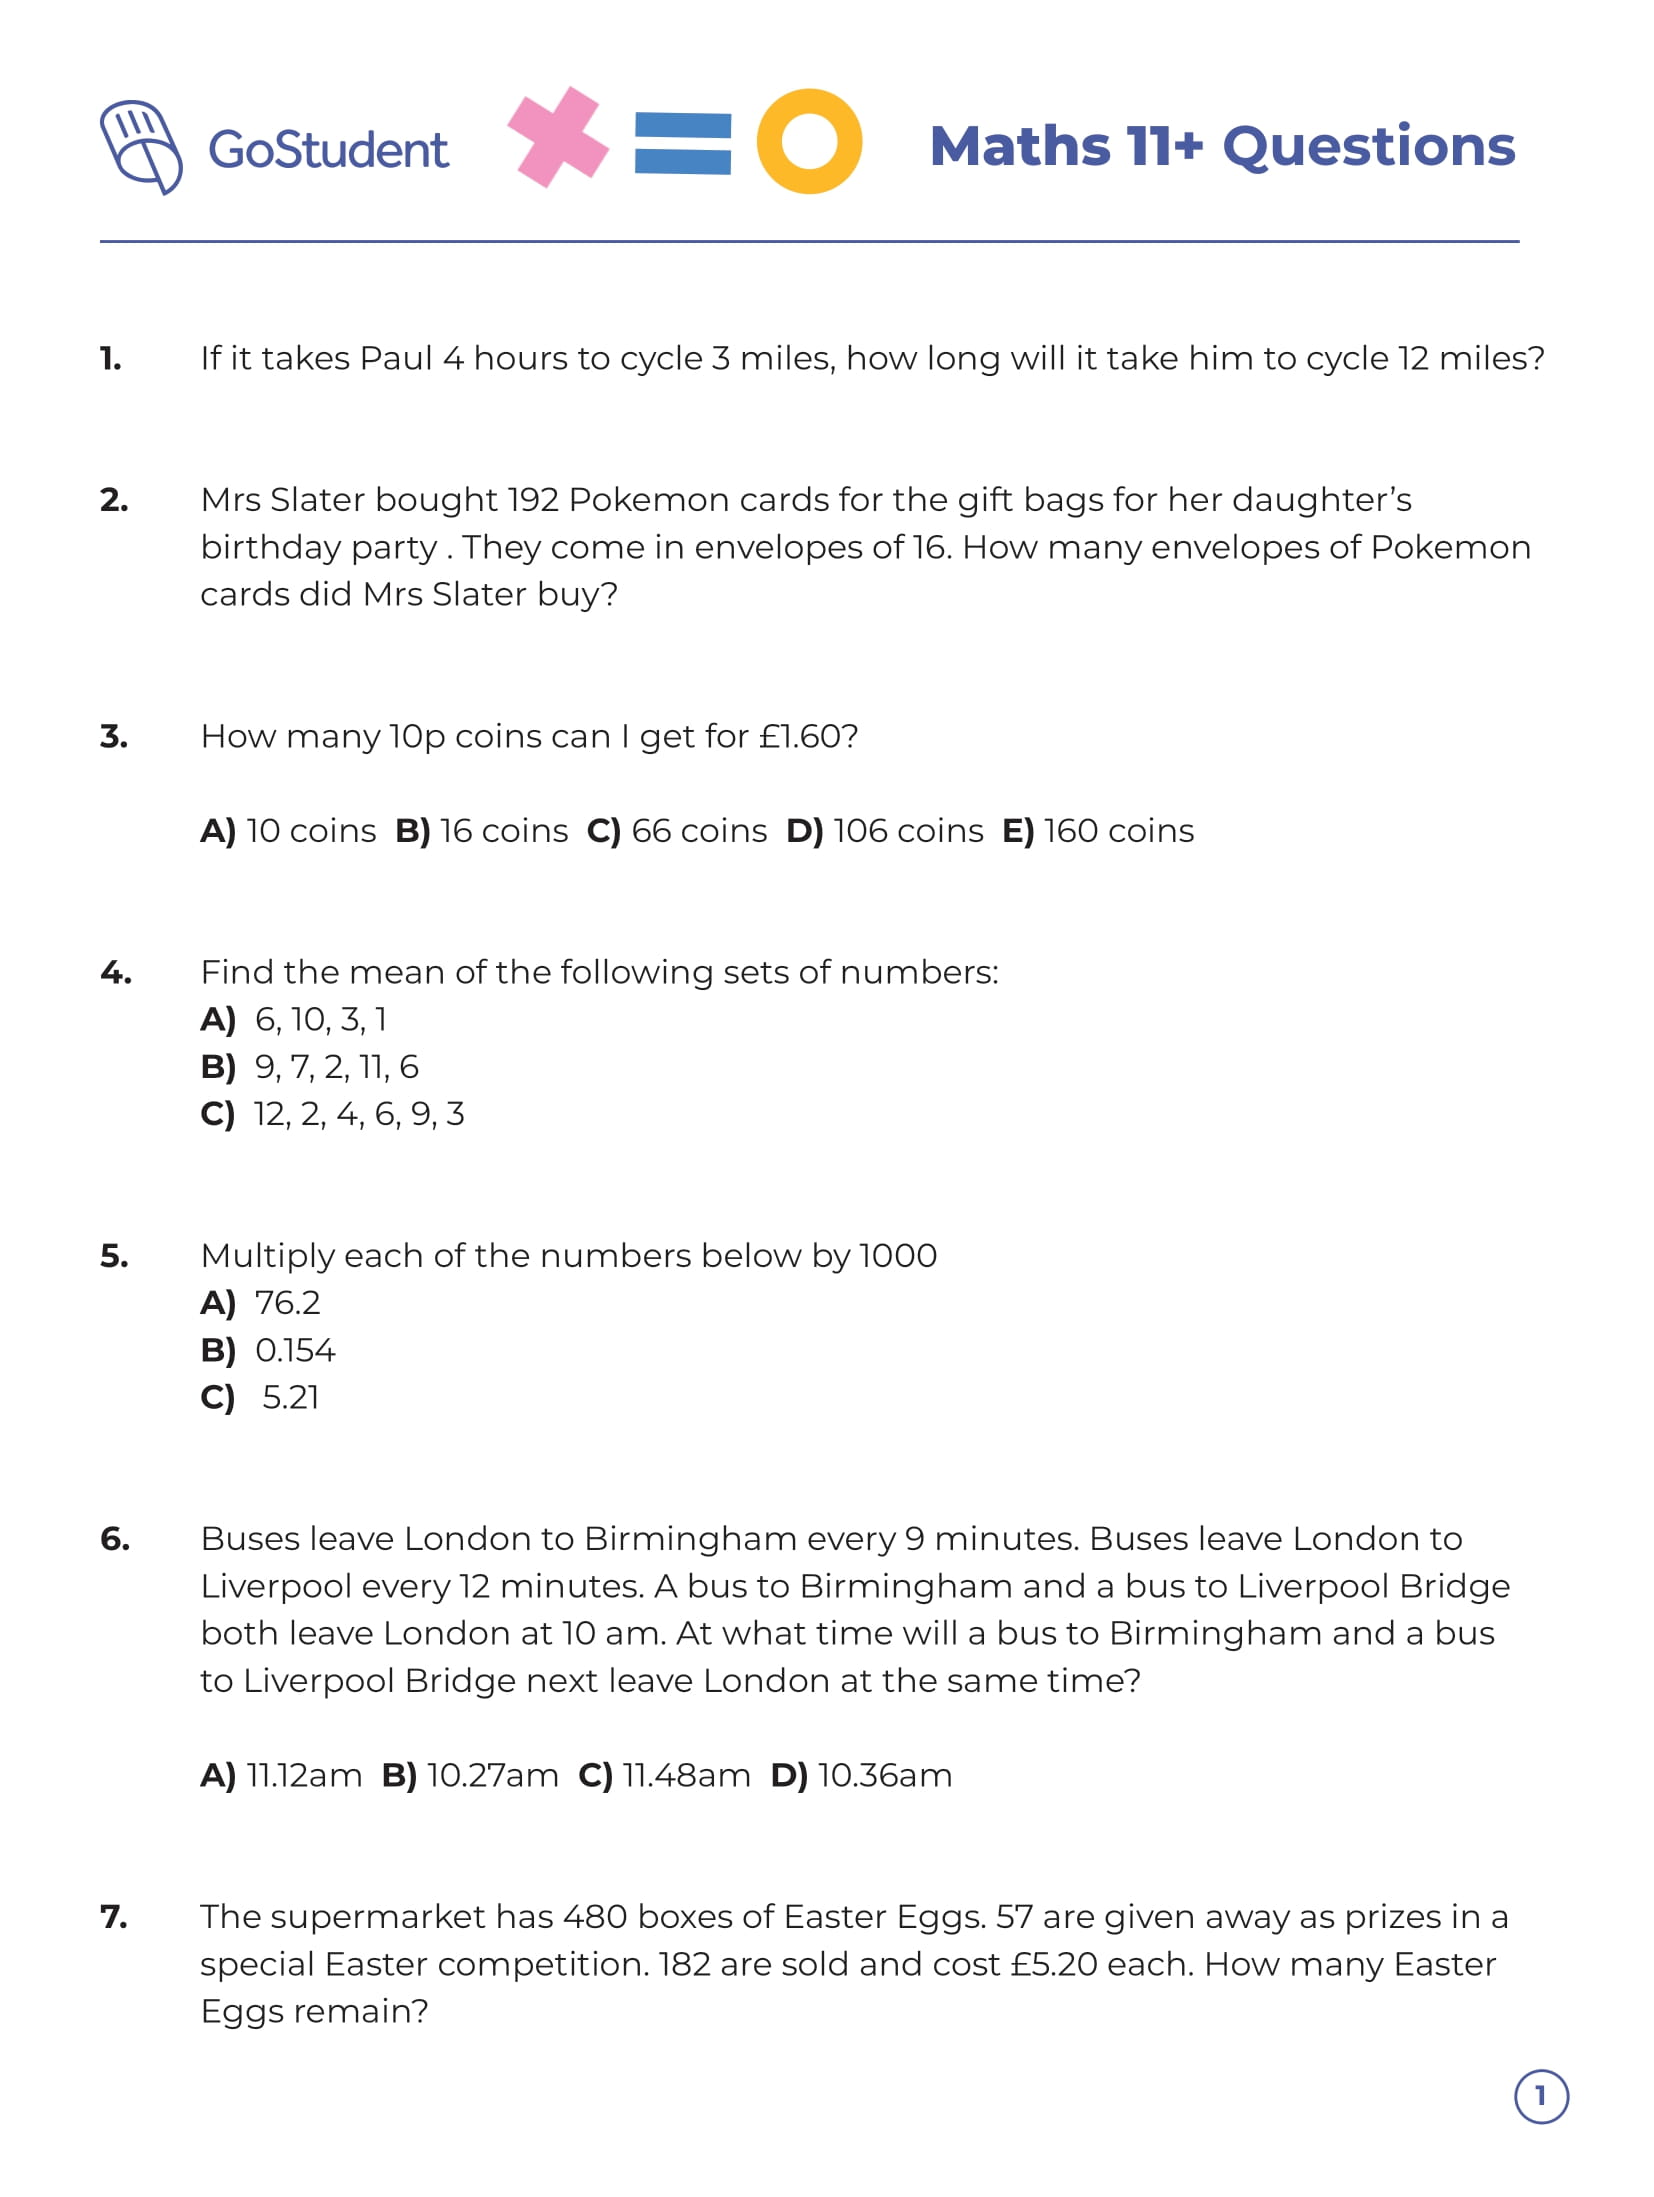 11 Plus (11+) Maths - Reflection - Past Paper Questions - Page 3 of 4